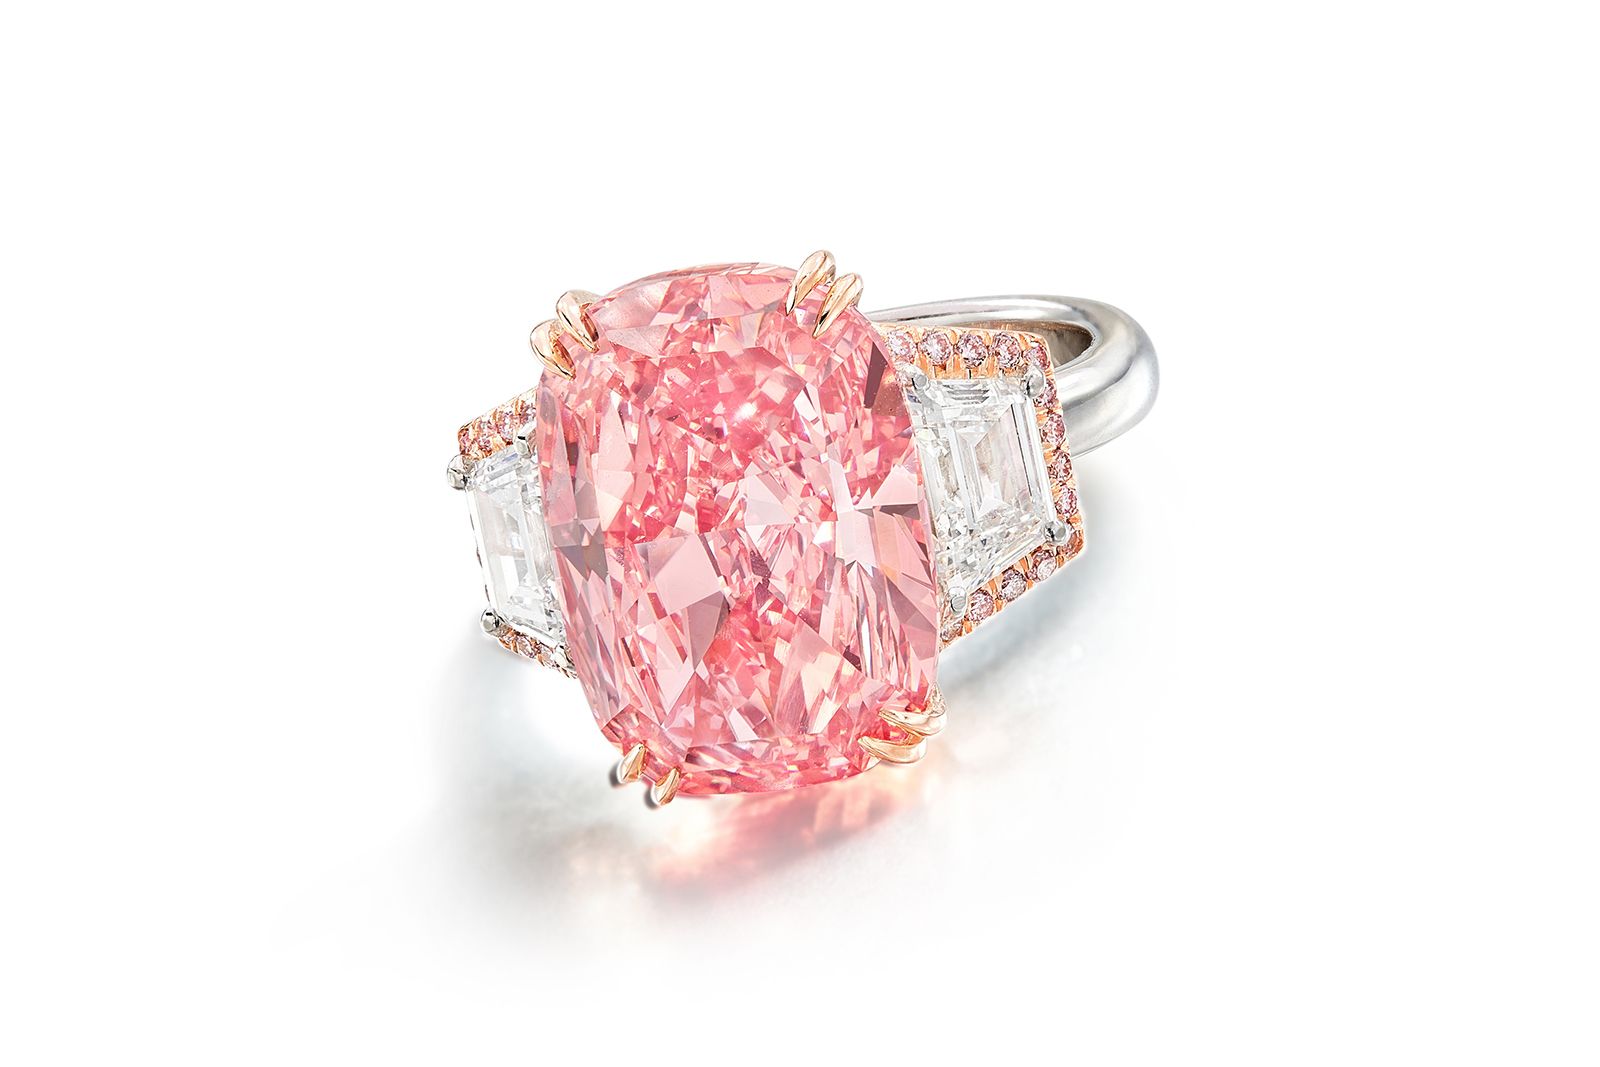 The Williamson Pink Star diamond is expected to surpass $21 million in bids.